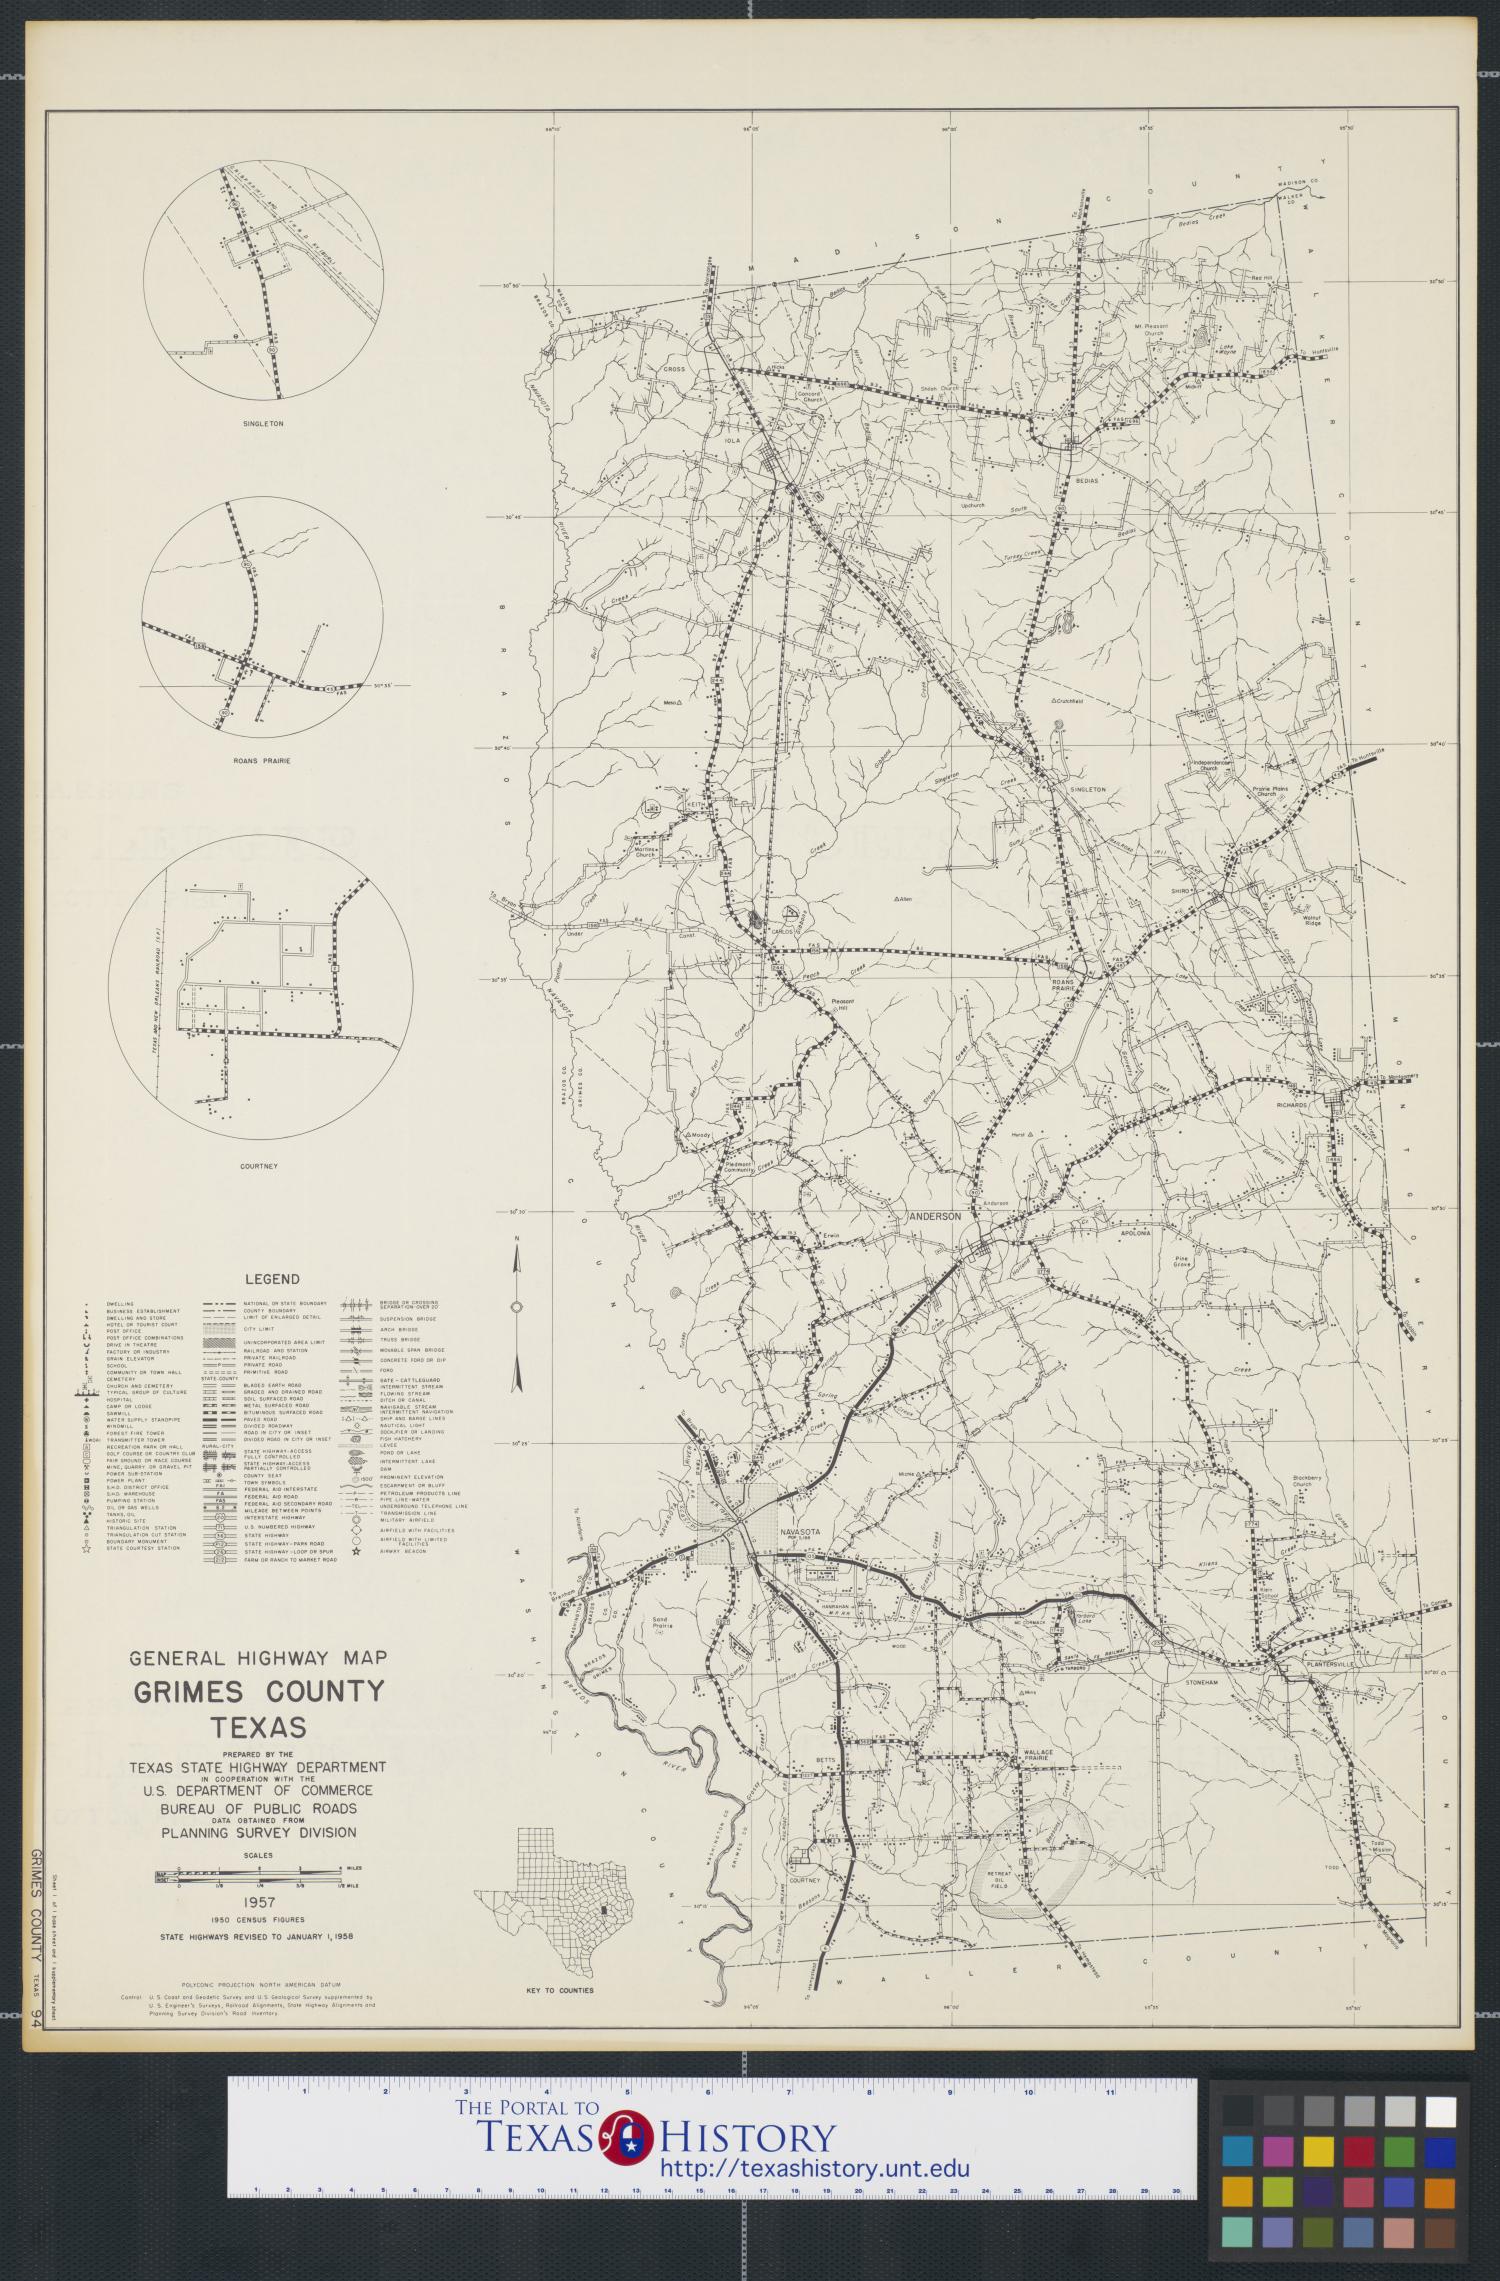 General Highway Map Grimes County Texas Side 1 Of 2 The Portal To